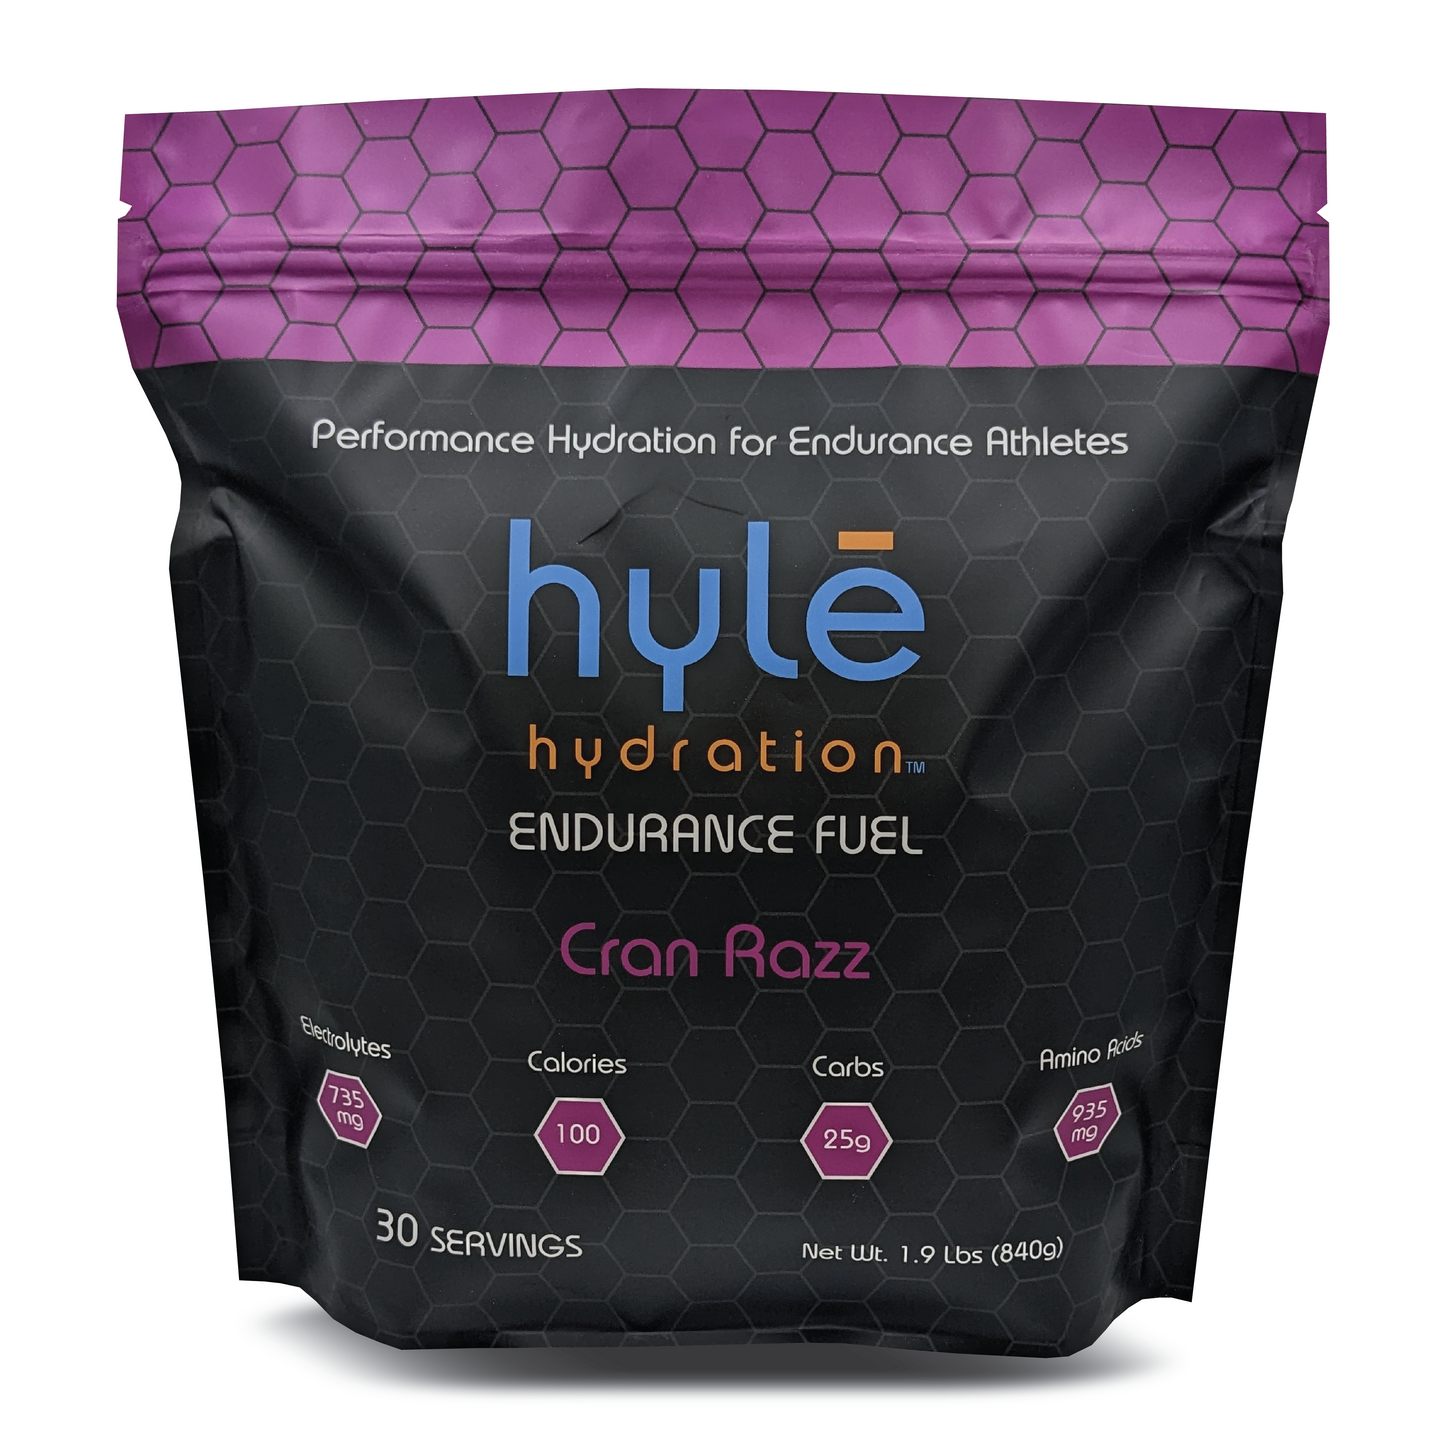 Hyle Hydration Endurance Fuel Cran Razz 30 serving bag. Hyle Hydration Endurance Fuel is a powdered sports drink mix with carbohydrates, electrolytes, and amino acids.